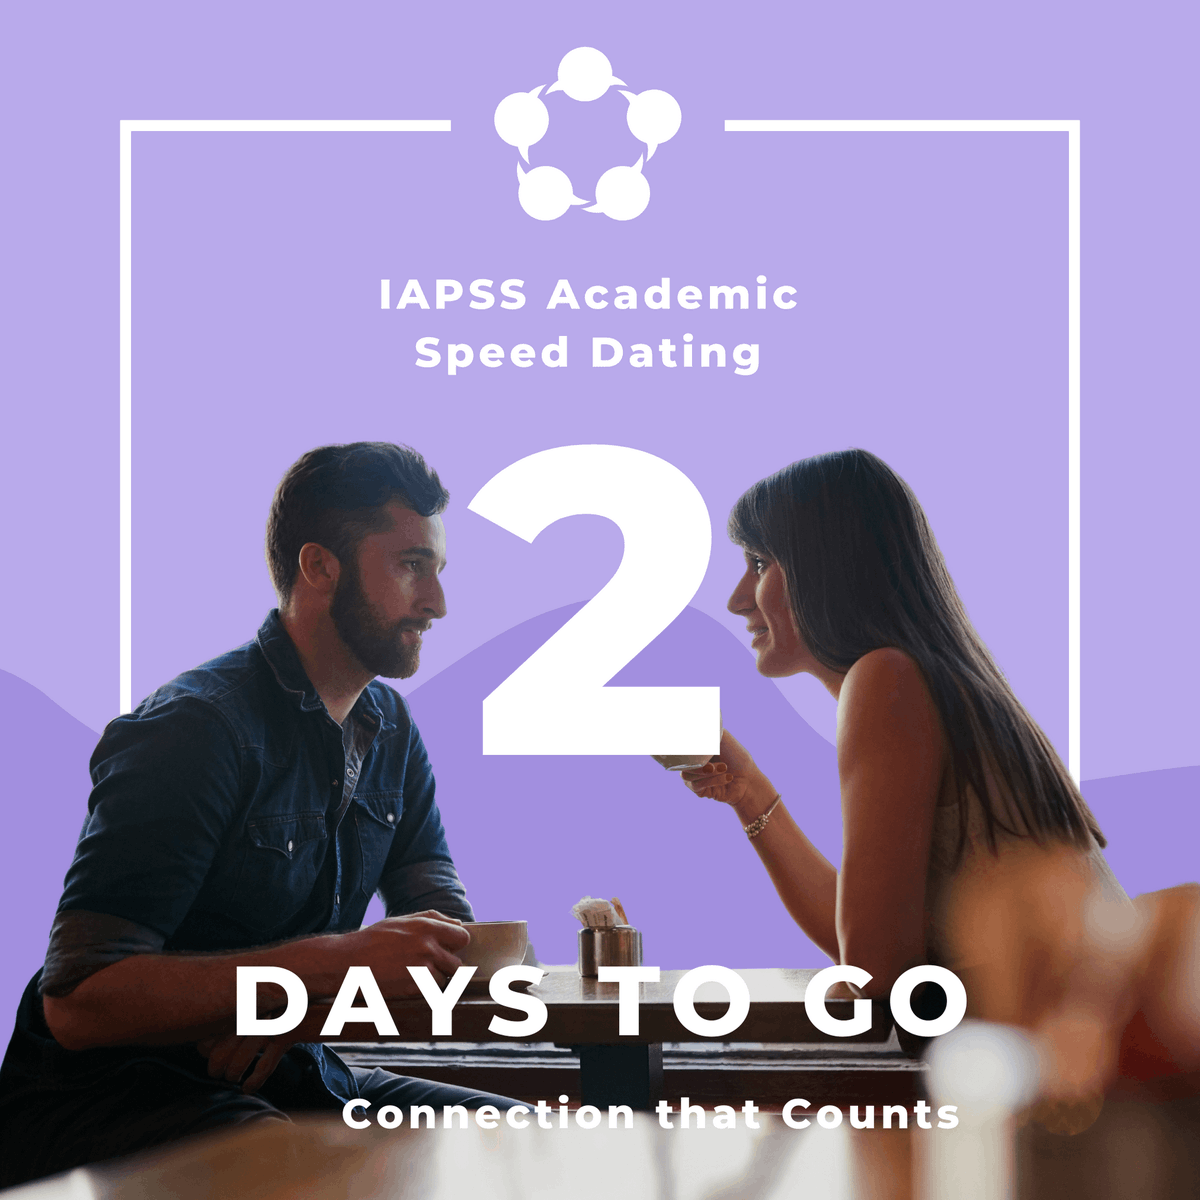 Ready to expand your academic network? Join us at IAPSS for our exciting new initiative: Academic Speed Dating! April 27th 10:30 EST / 16:30 CEST Register here: docs.google.com/forms/d/e/1FAI… Let’s make connections that count! #IAPSS #AcademicNetworking #ProfessionalGrowth